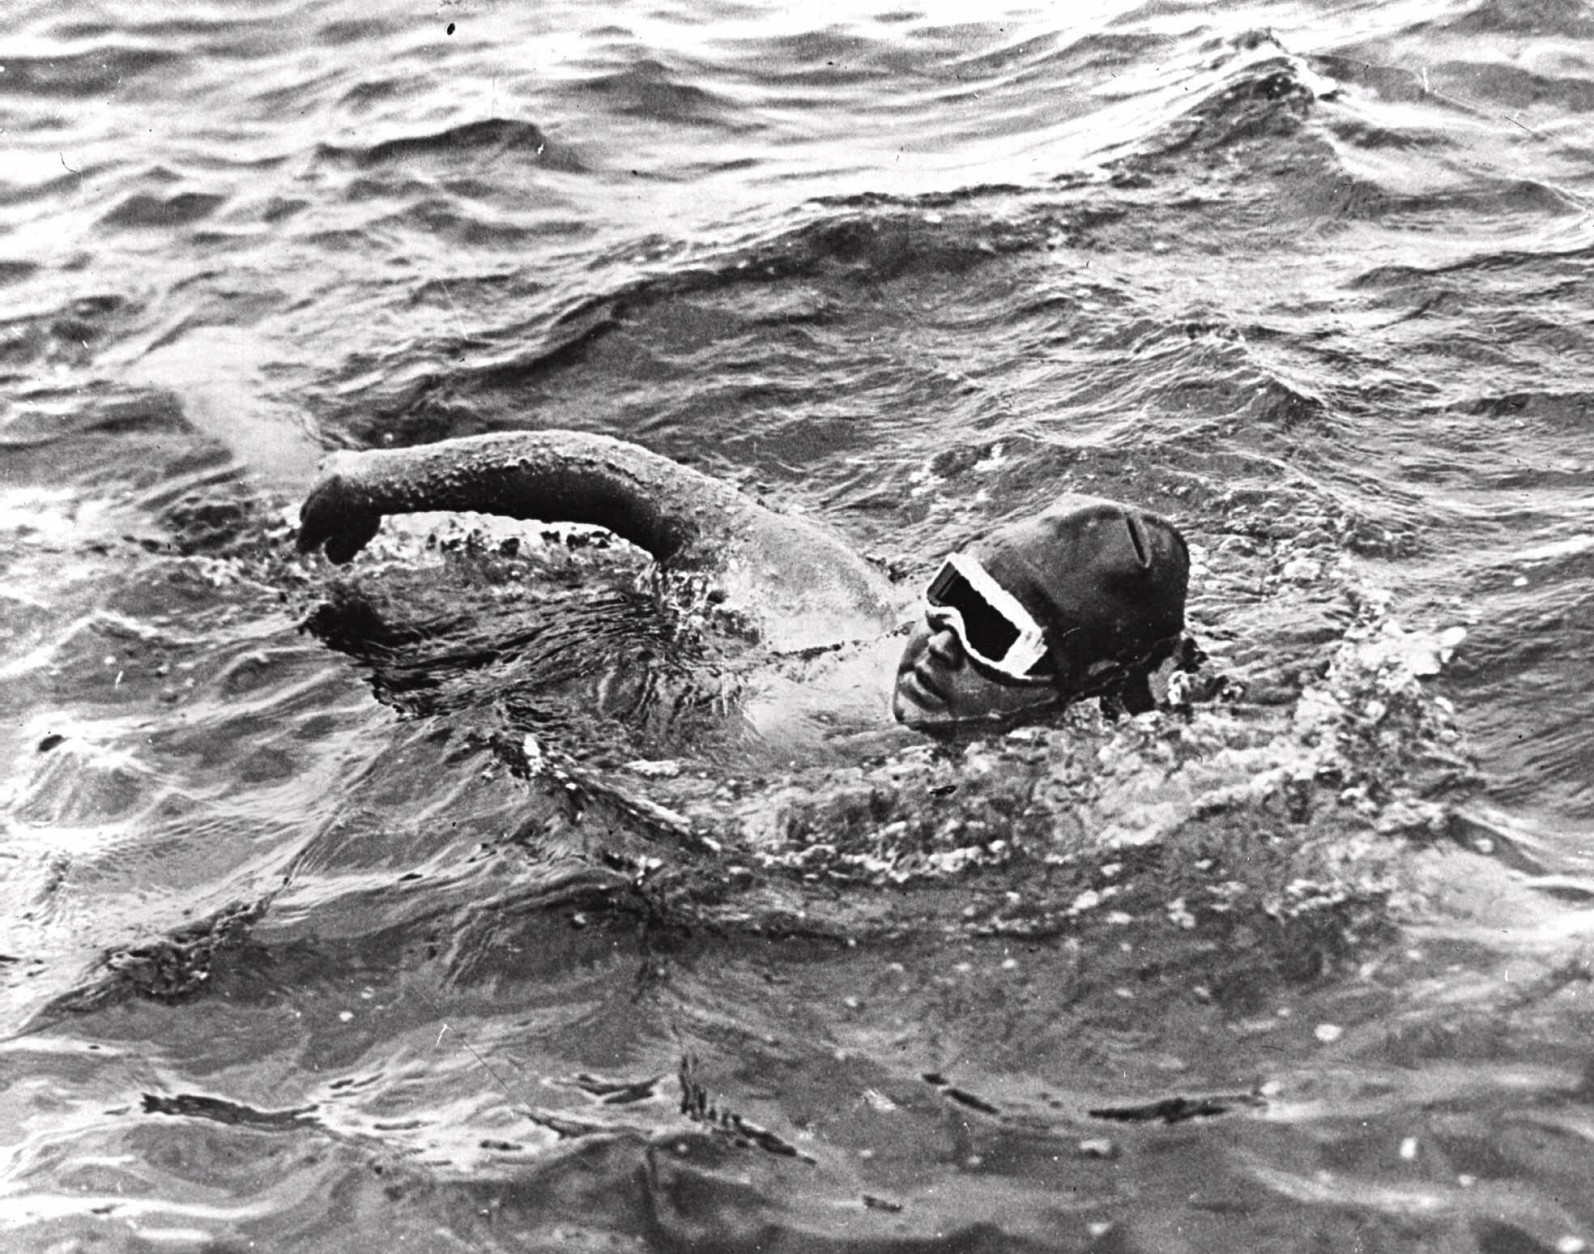 Nineteen-year-old Gertrude Ederle of New York City becomes the first woman to swim the English Channel on Aug. 6, 1926, as she crosses the waterway in 14 hours and 31 minutes. (AP Photo)